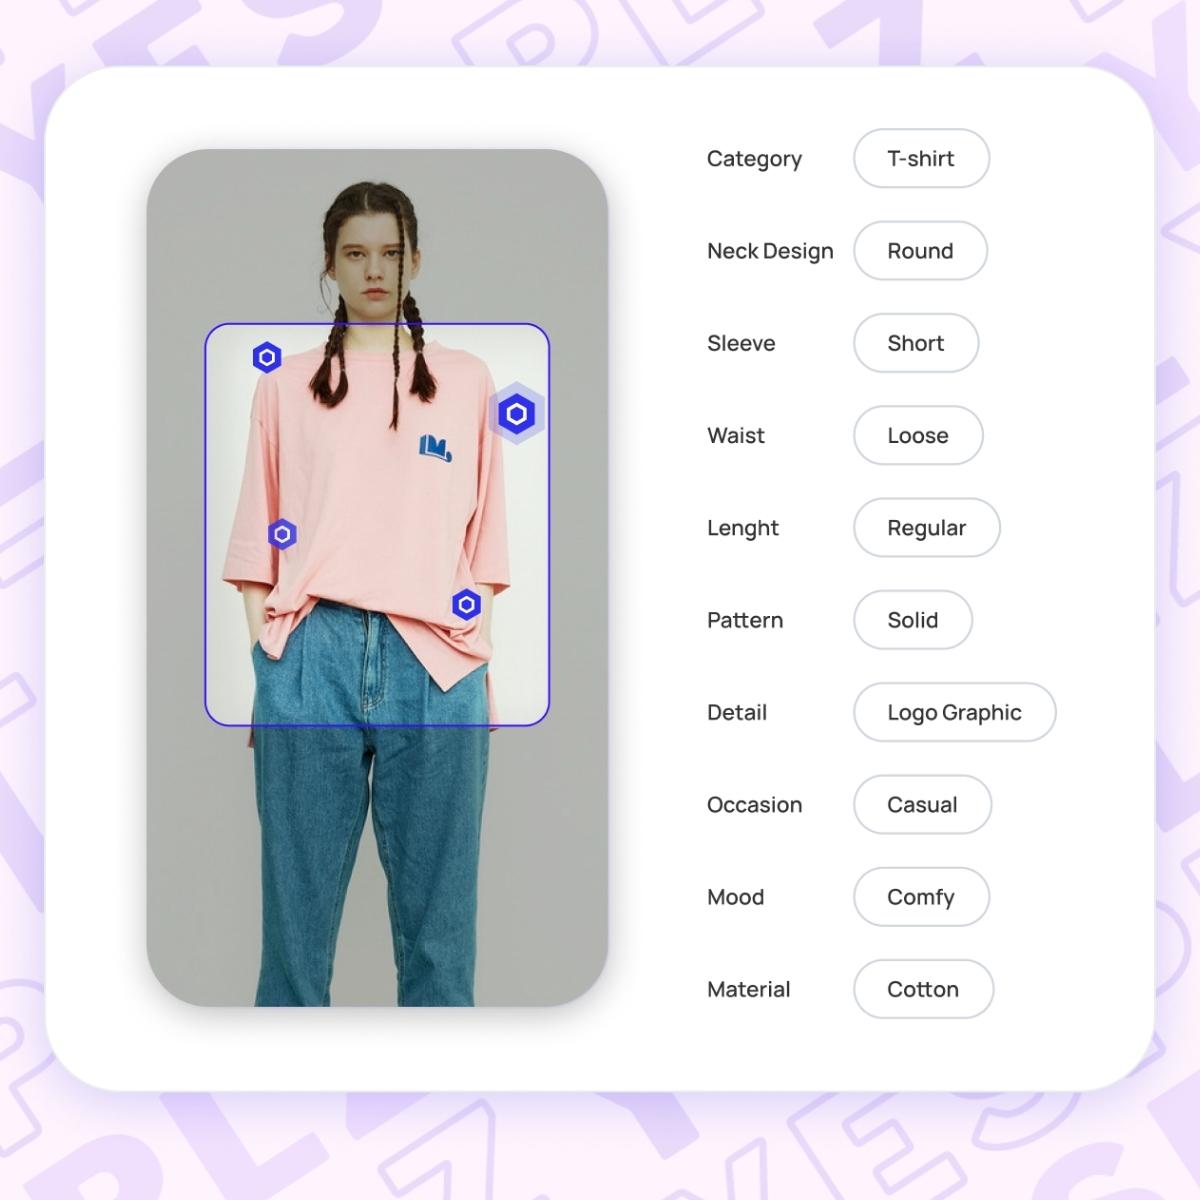 YesPlz image tagging a pink t-shirt, mapping product attributes like occasion, silhouette, and length